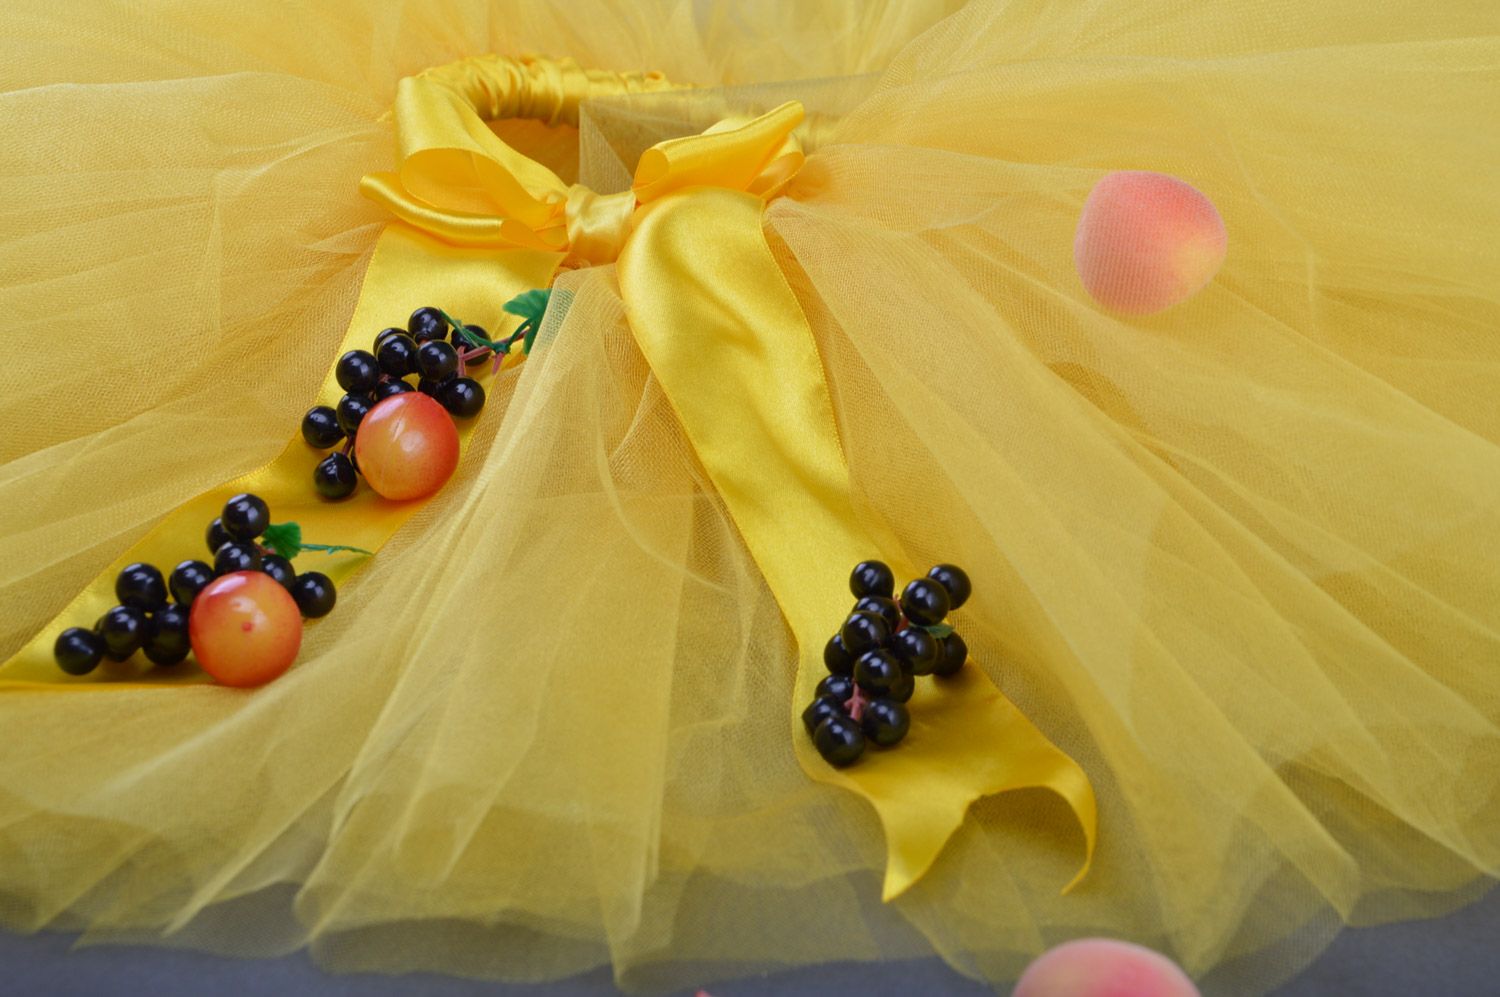 Handmade ballet tutu skirt sewn of bright yellow tulle and ribbons for children photo 3